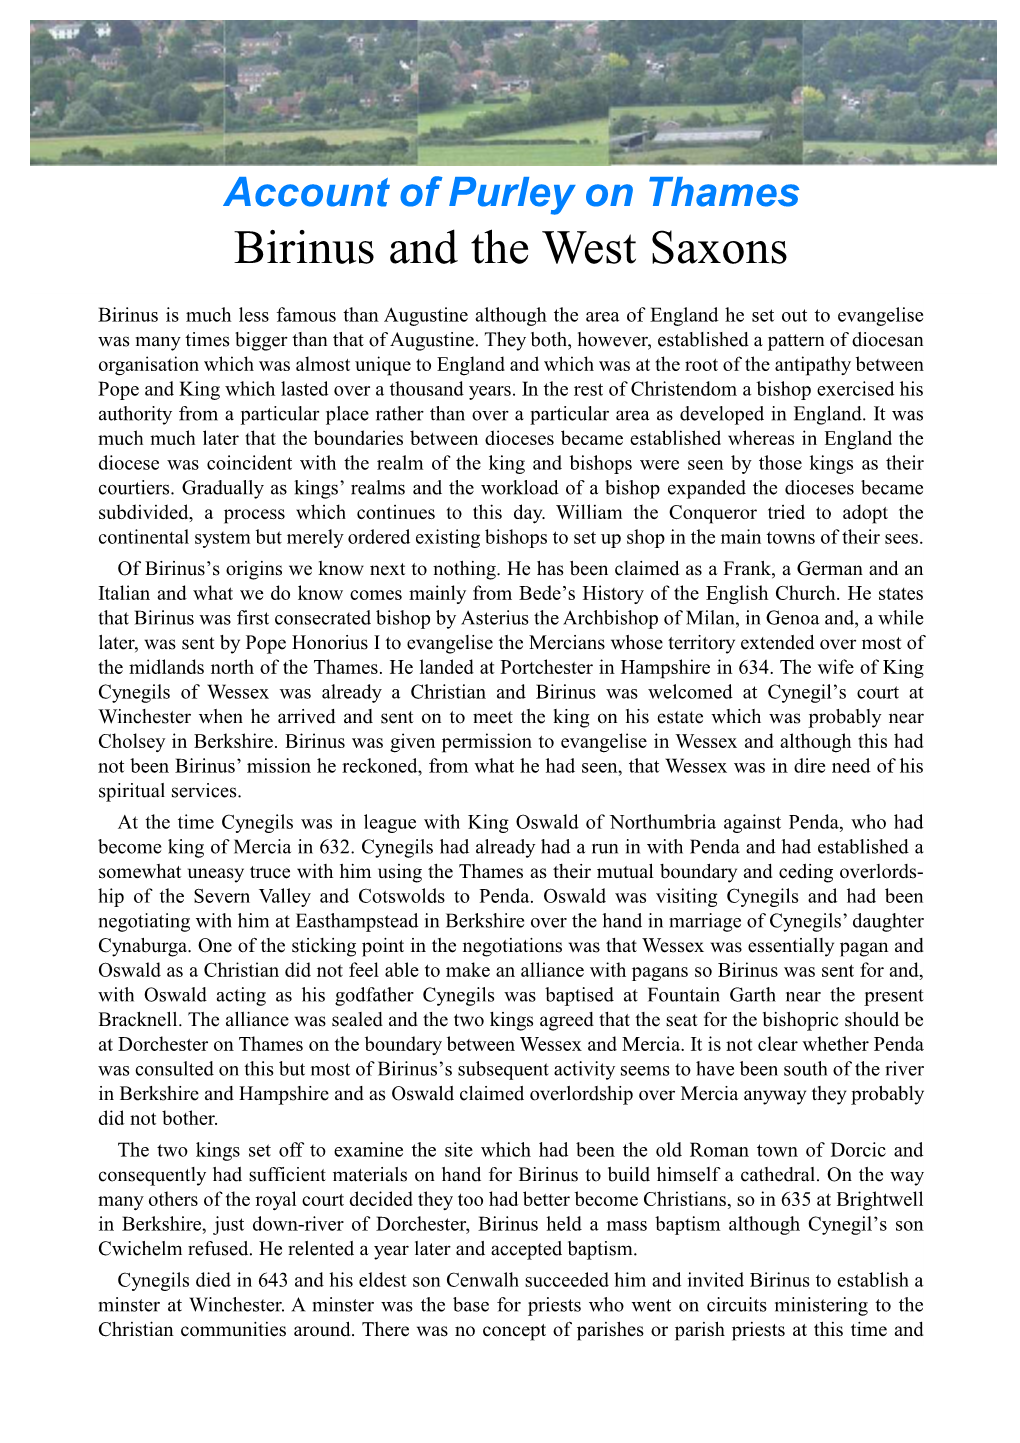 Birinus and the West Saxons